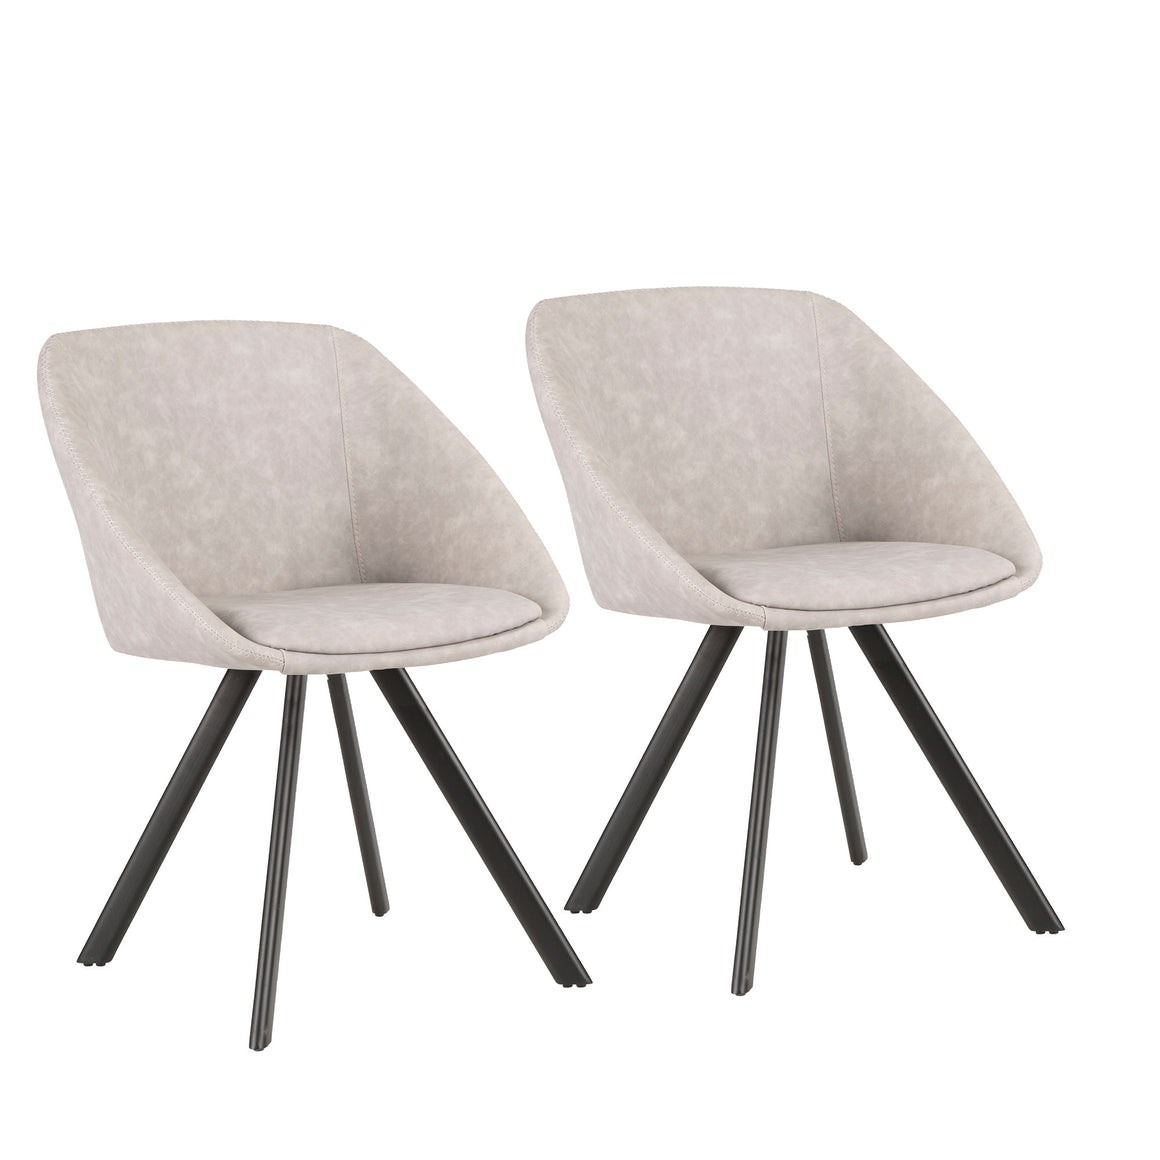 Matisse Contemporary Chair in Grey Faux Leather by LumiSource - Set of 2